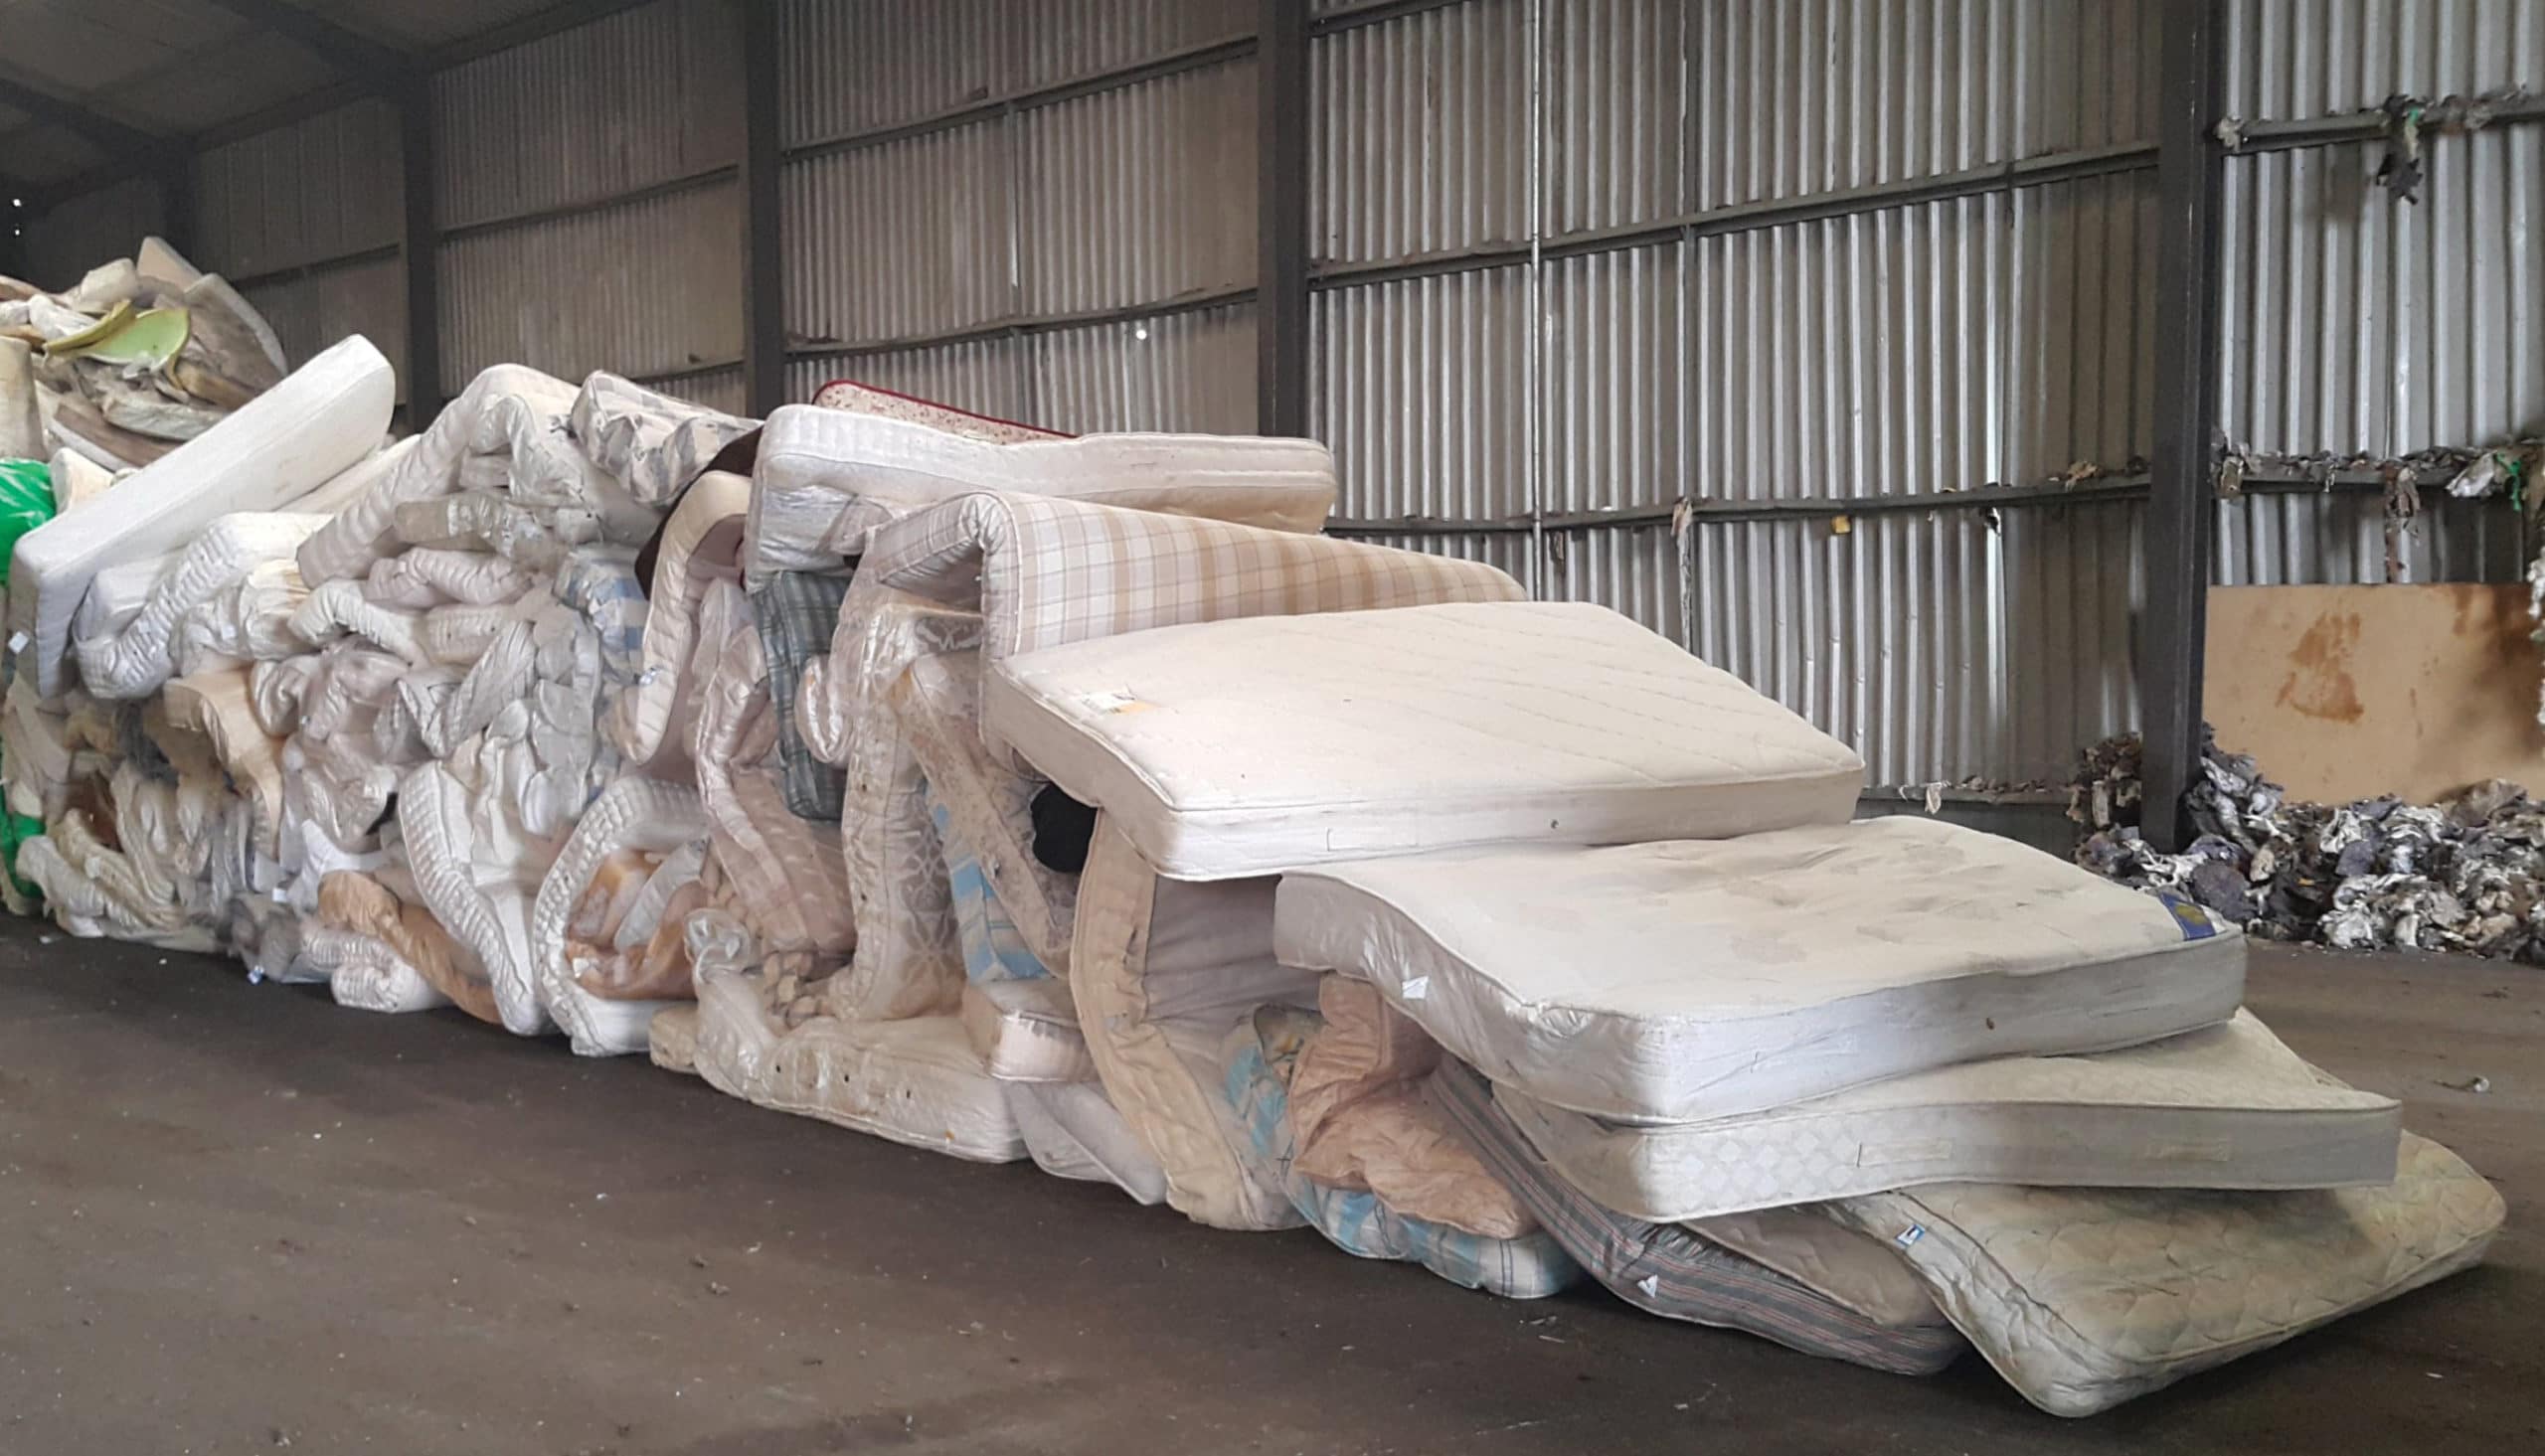 Drop Off The Mattress At A Local Collection Site